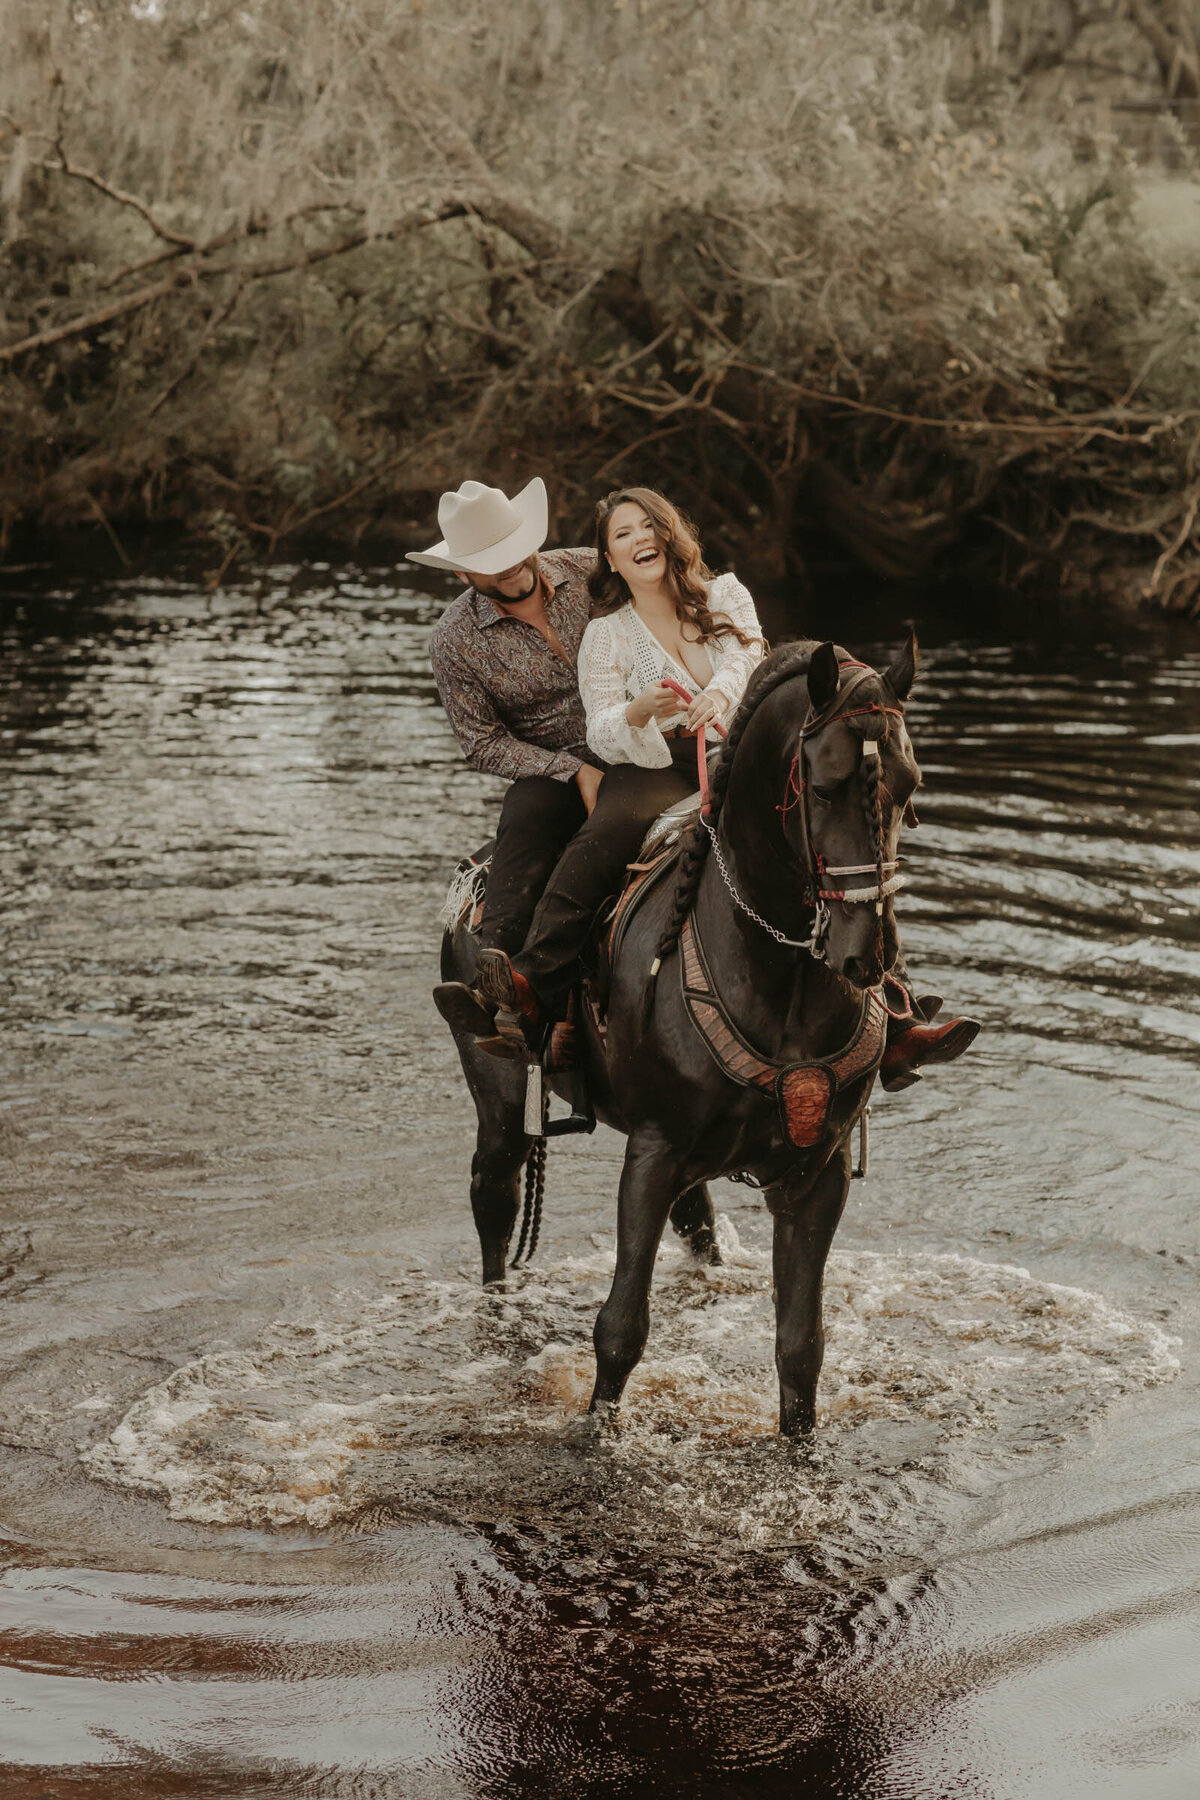 This image is of a couple riding a horse for a portrait.